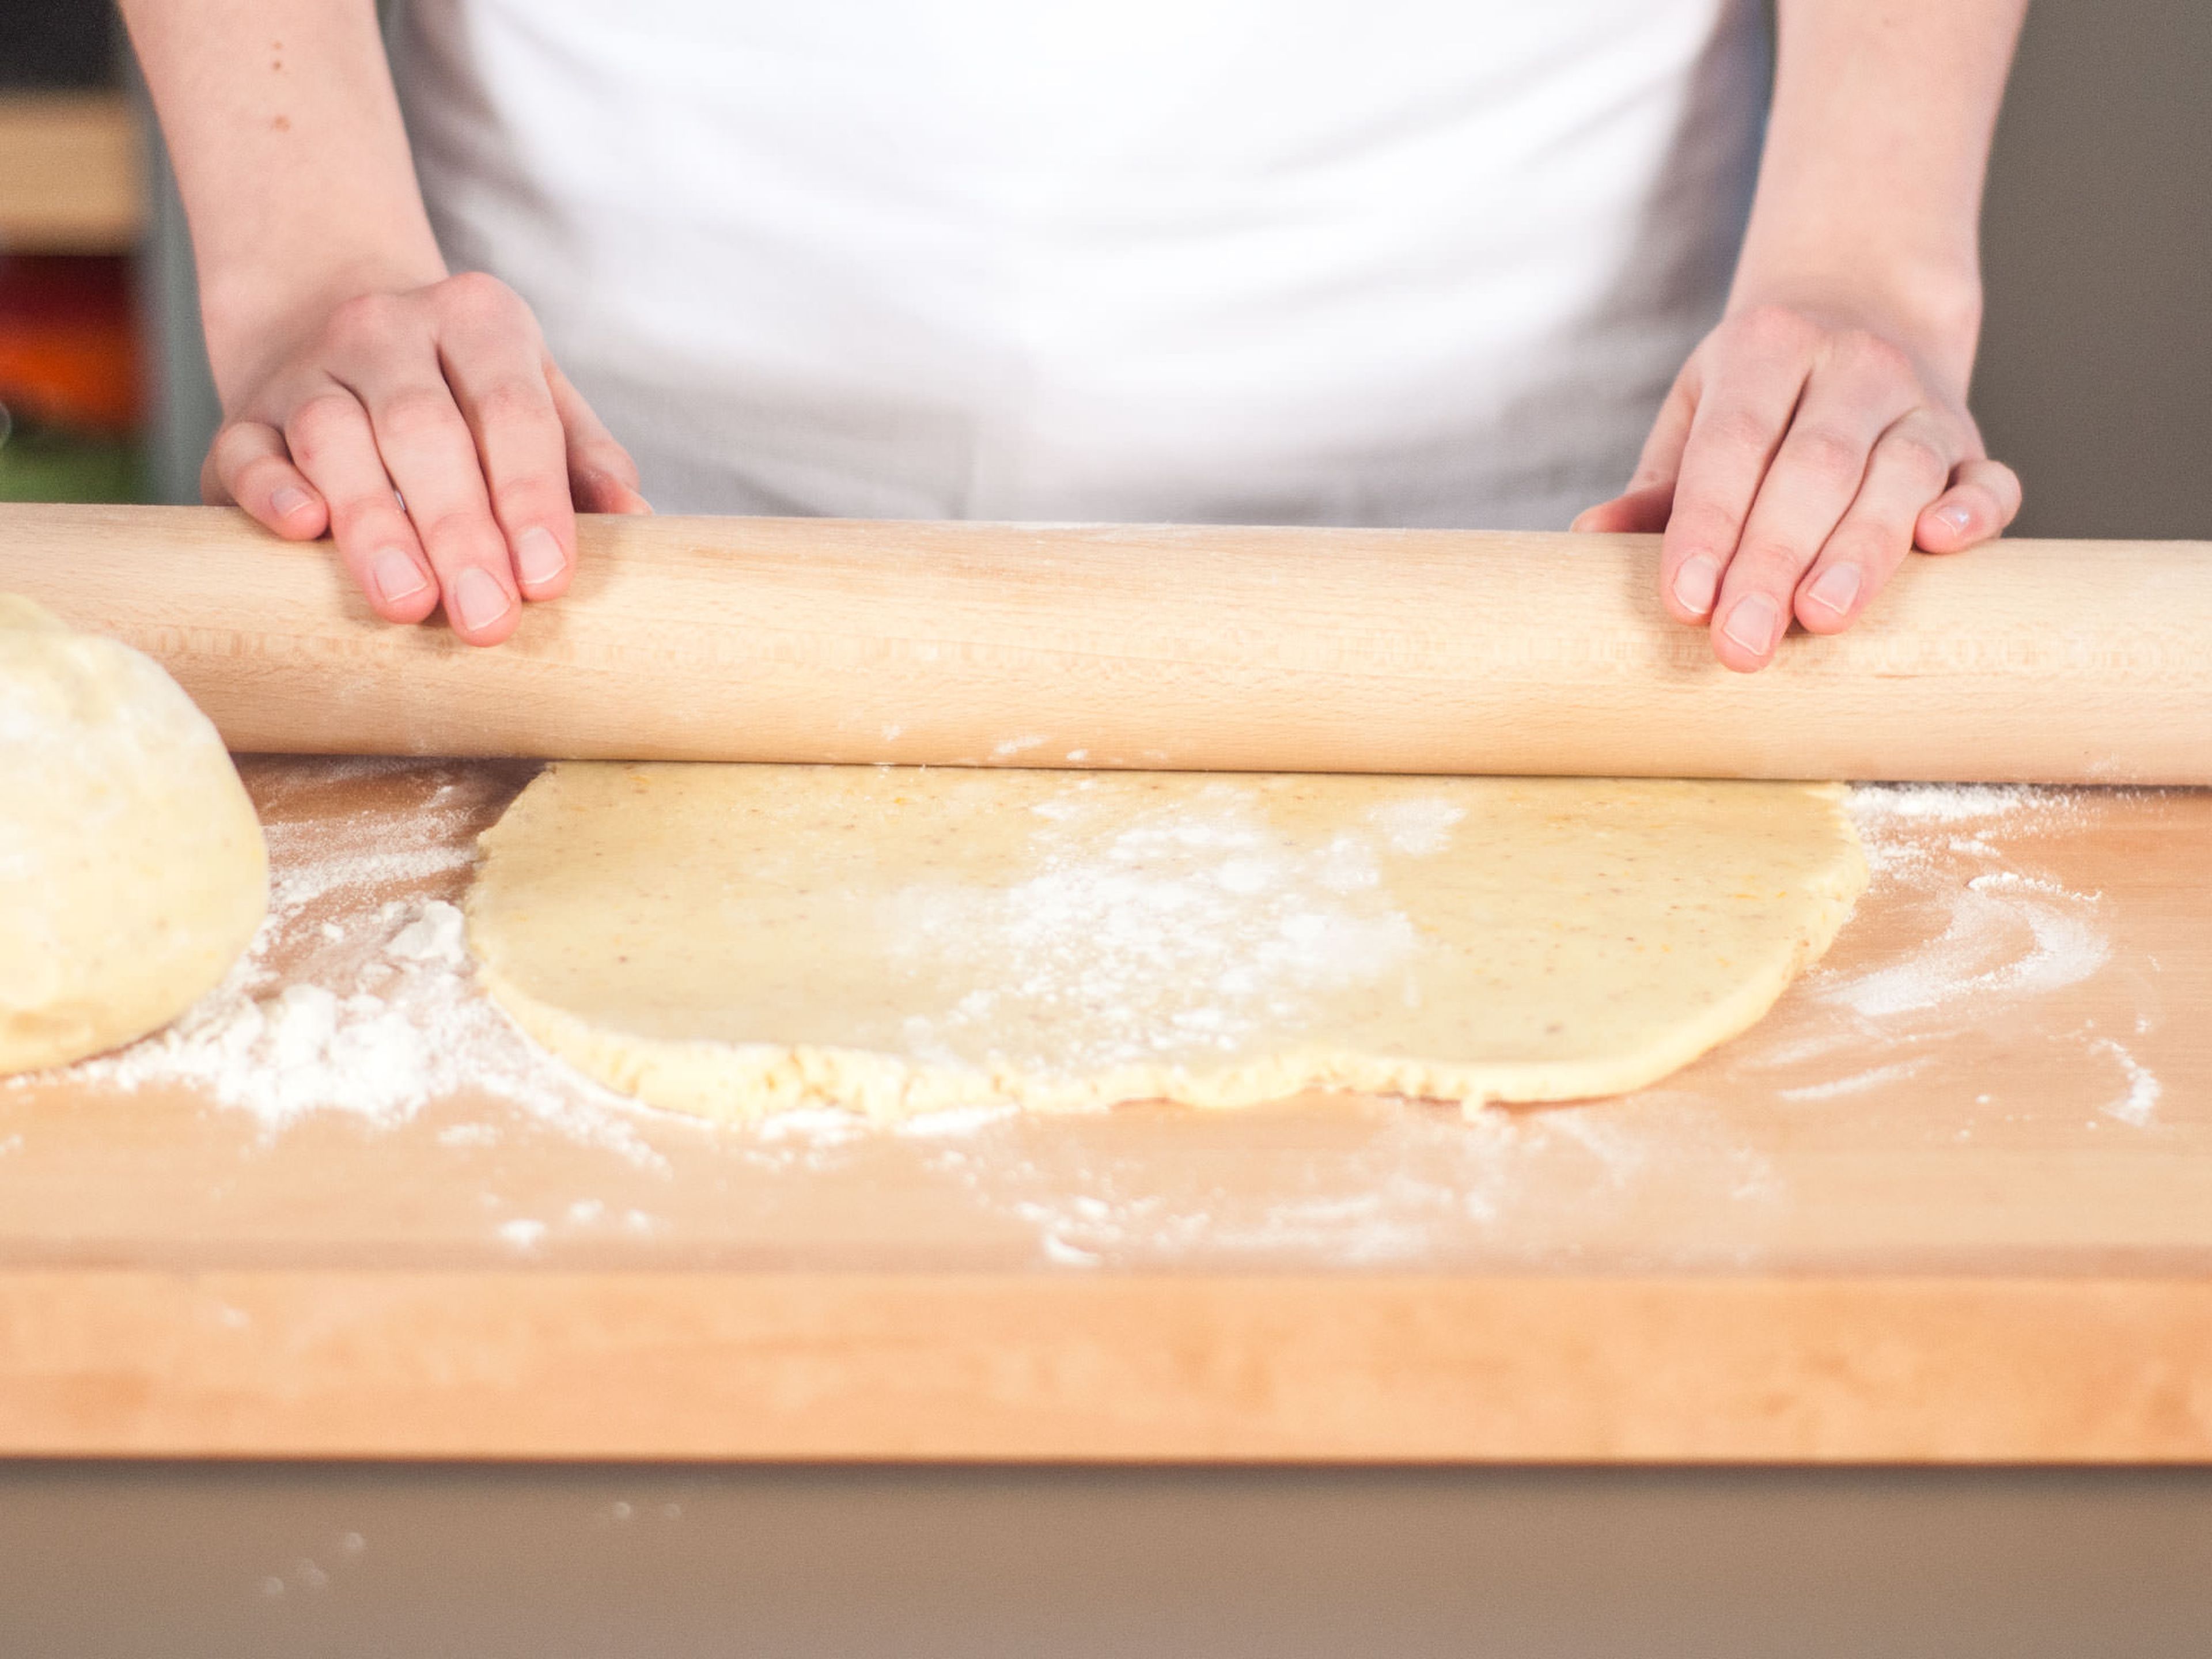 If necessary, grease pie dish and lightly flour work surface. Divide dough into two parts. Using a rolling pin, roll out so that each piece is slightly larger than the pie dish. Carefully transfer one dough round to pie dish and press into the dish. Cut off overhanging dough by rolling the rolling pin over the edges of the dish.